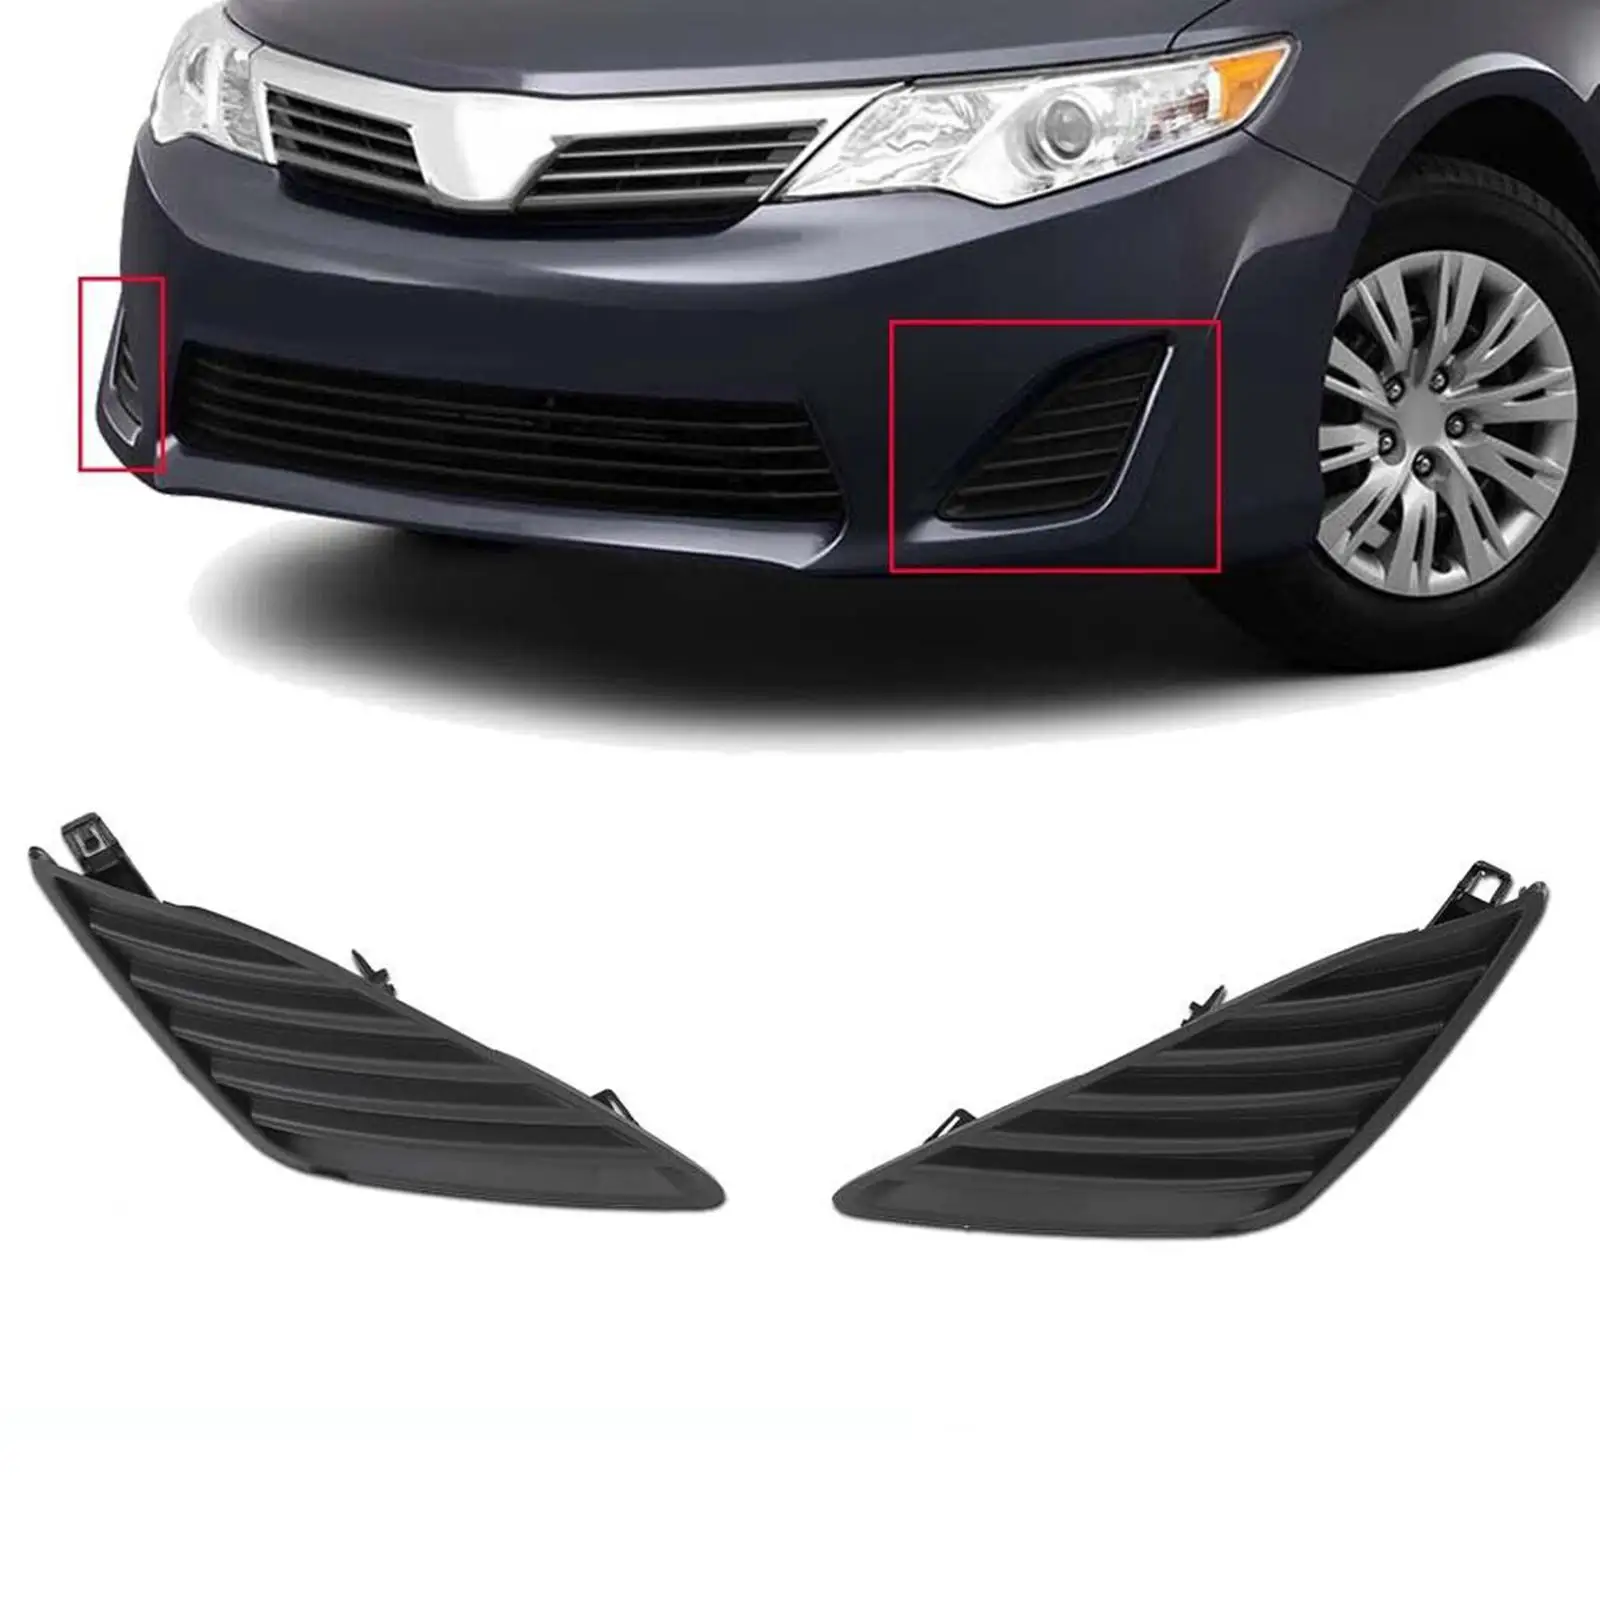 Automotive Front Bumper Fog Light Cover Cap Car Accessory Parts Left Right Durable High Quality for Toyota for Camry 2012-2014